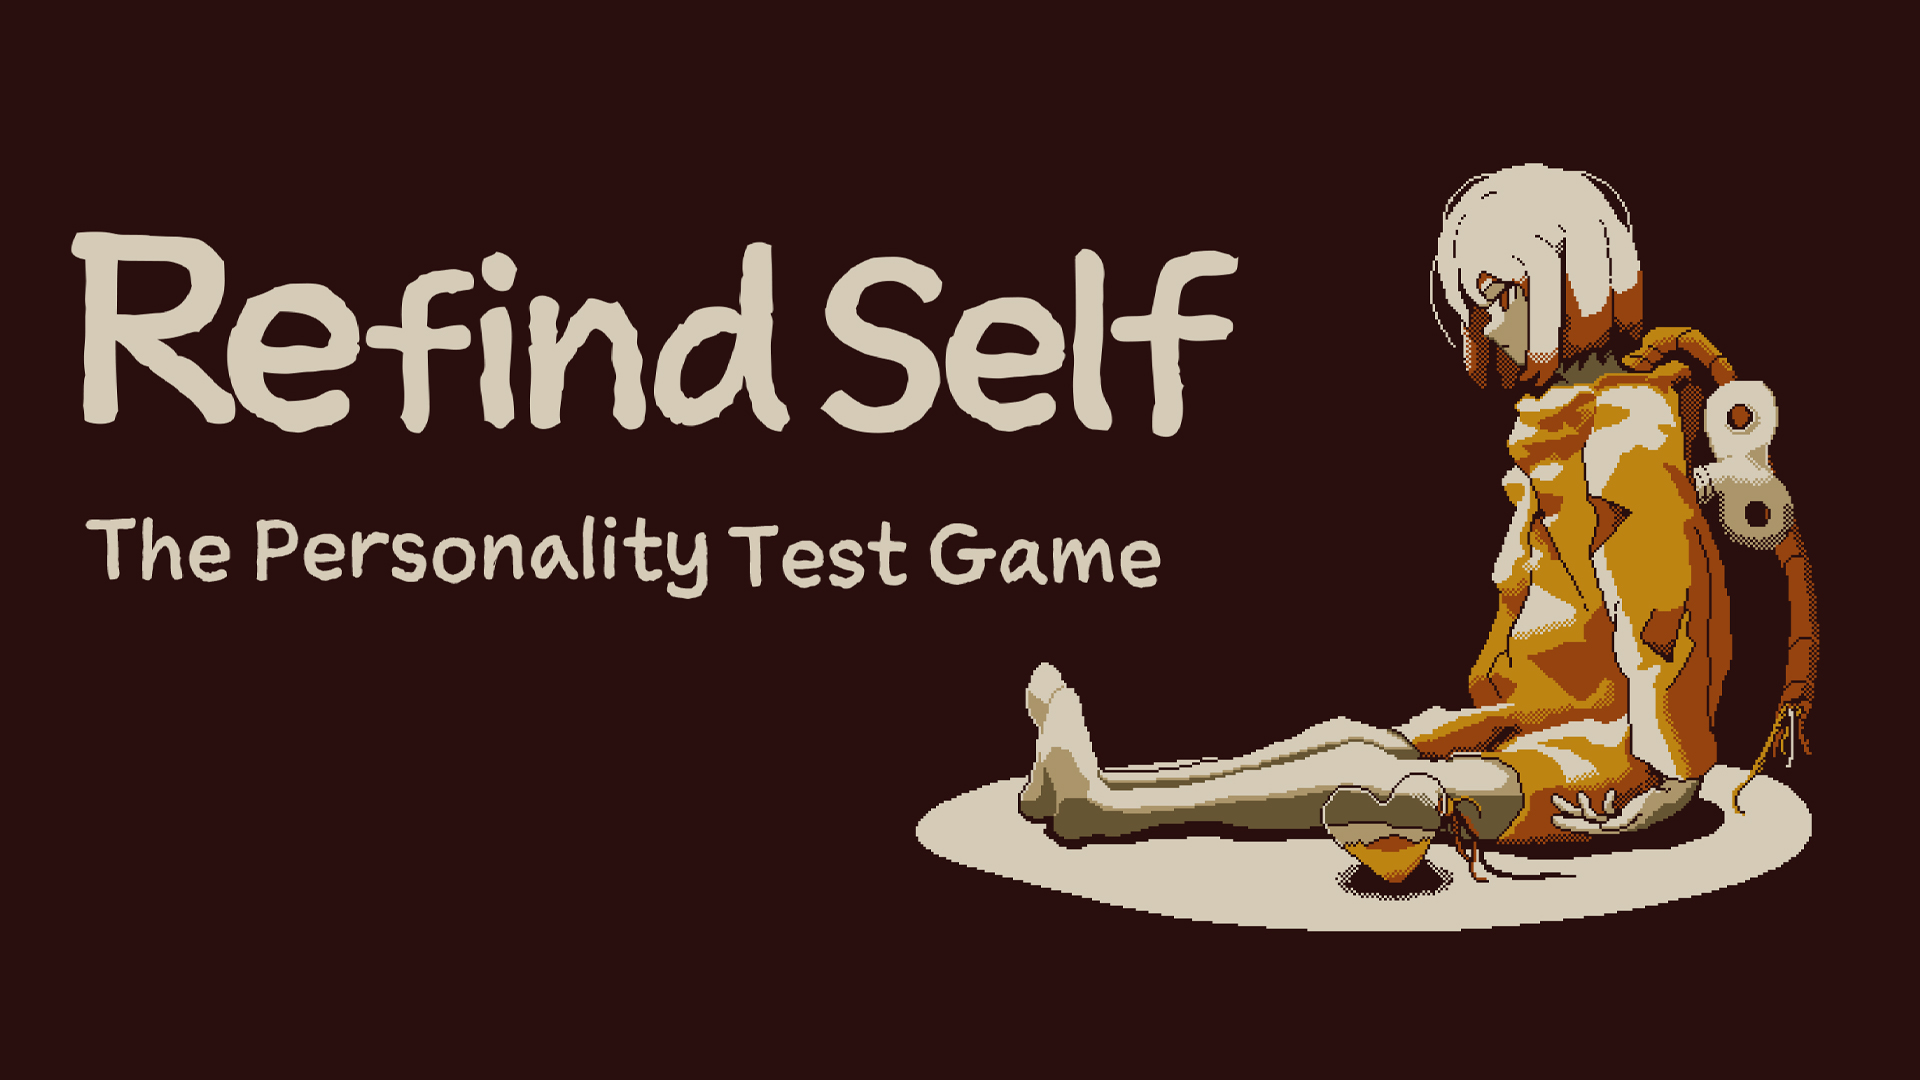 Refind Self: The Personality Test Game Refind Self The Personality Test Game 